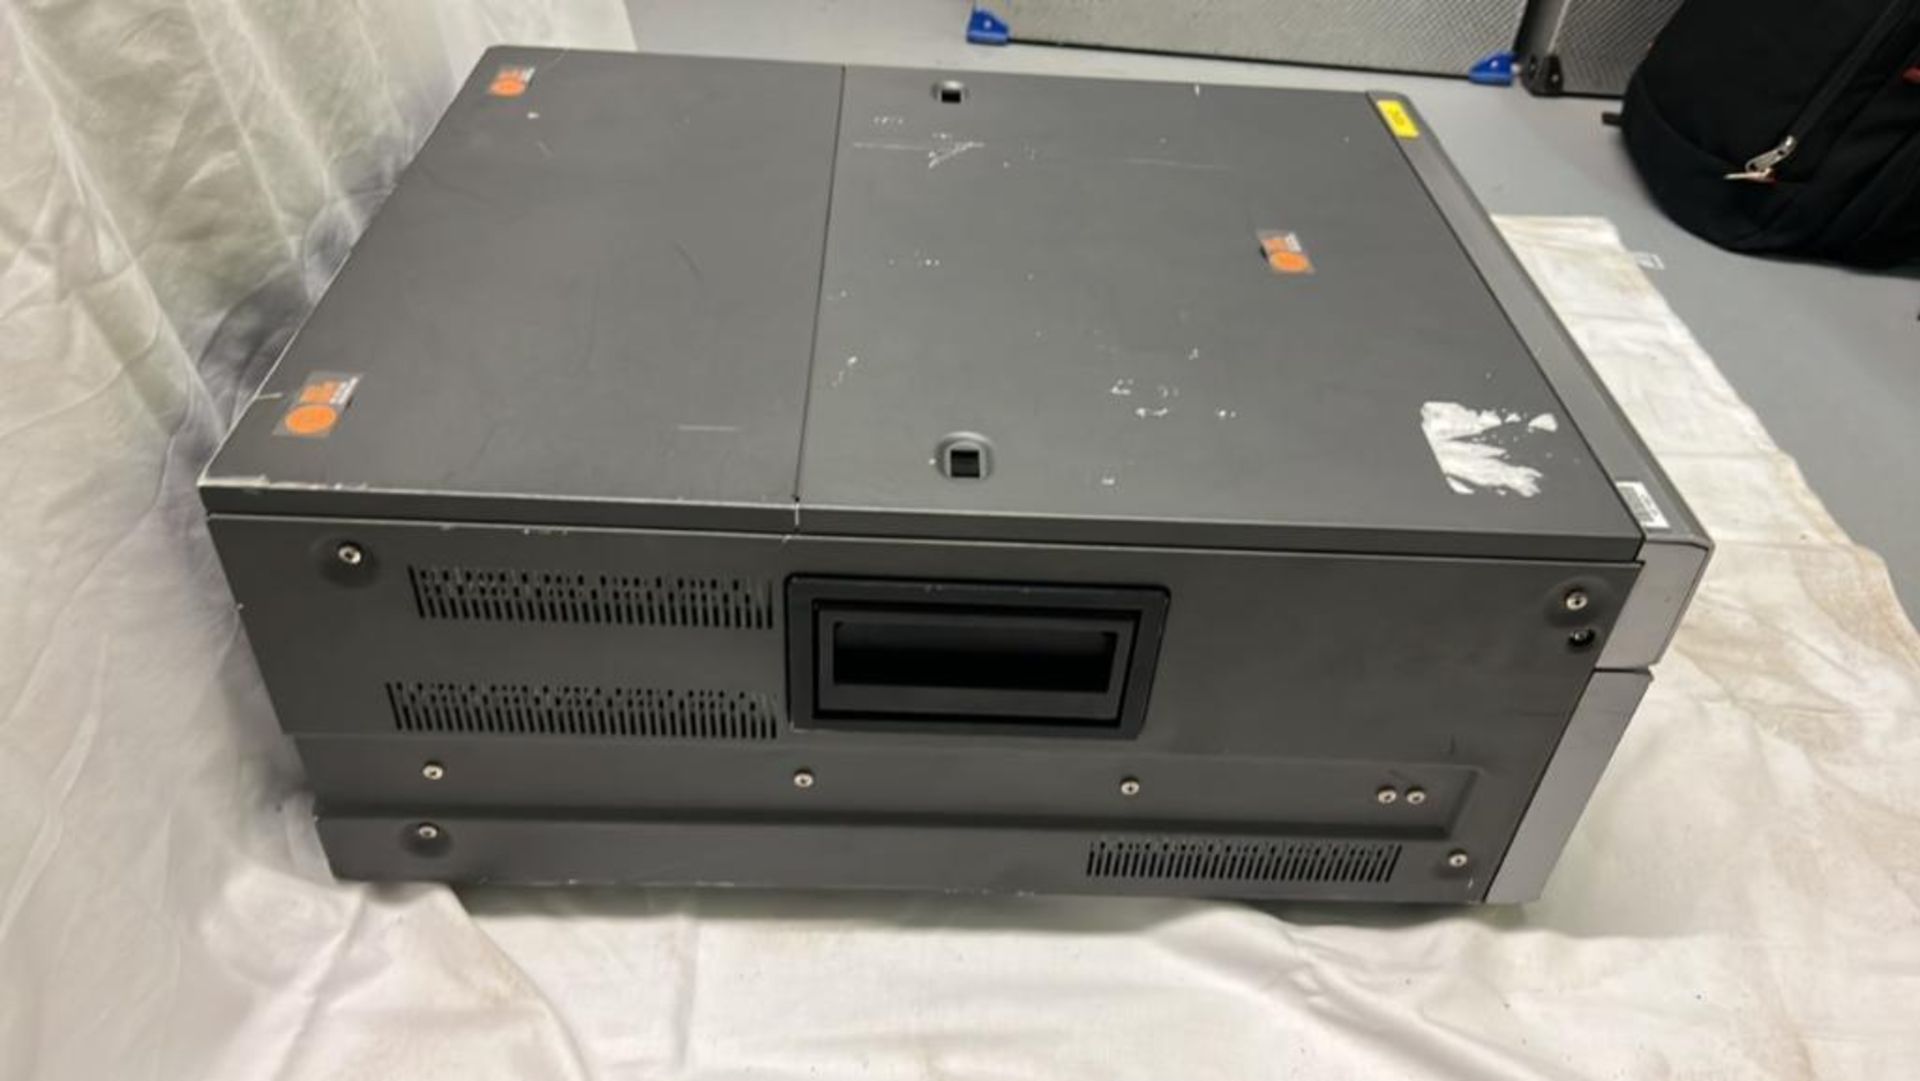 Sony SRW-5500 Digital Videocassette recorder with flight case SN :10042 - Image 2 of 5